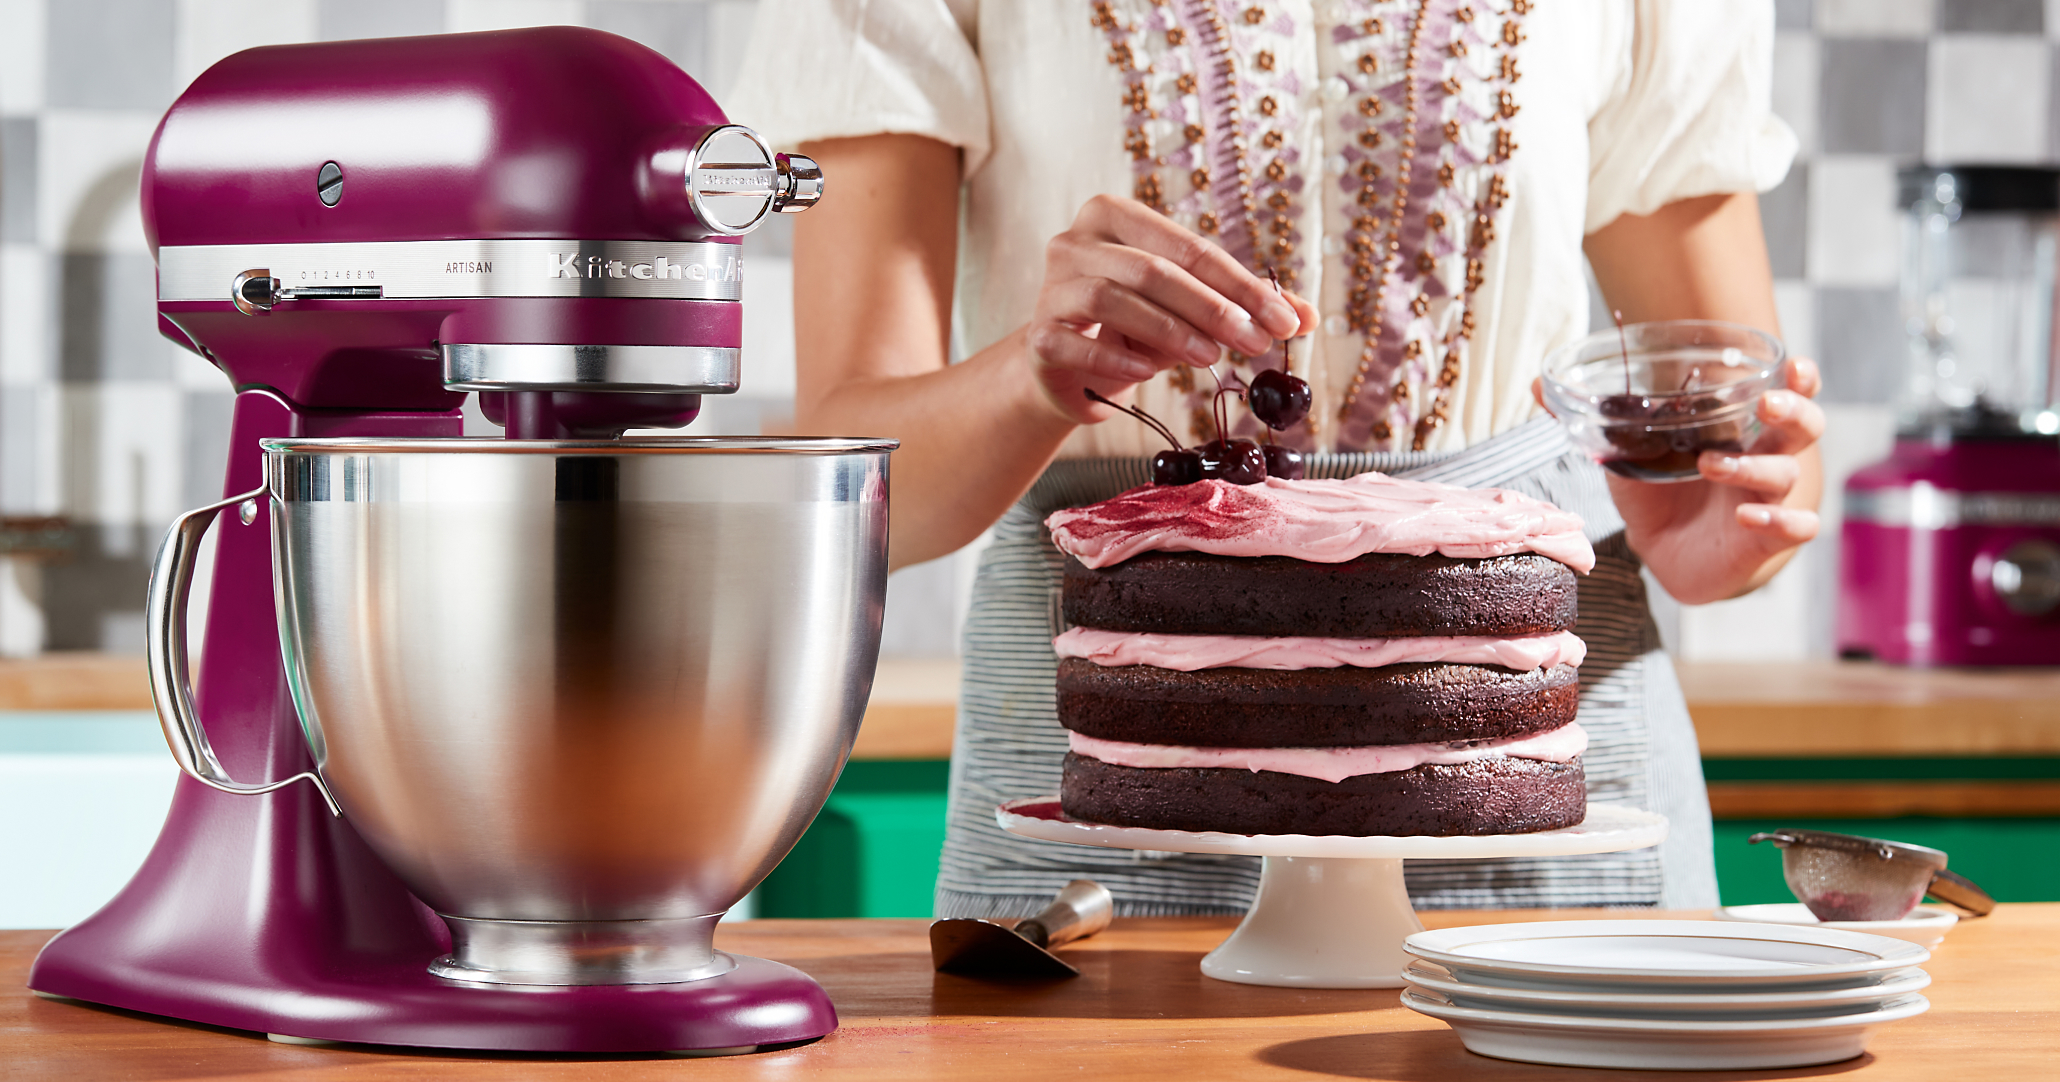 Woman garnishing chocolate layer cake with cherries placed next to KitchenAid® stand mixer in Beetroot